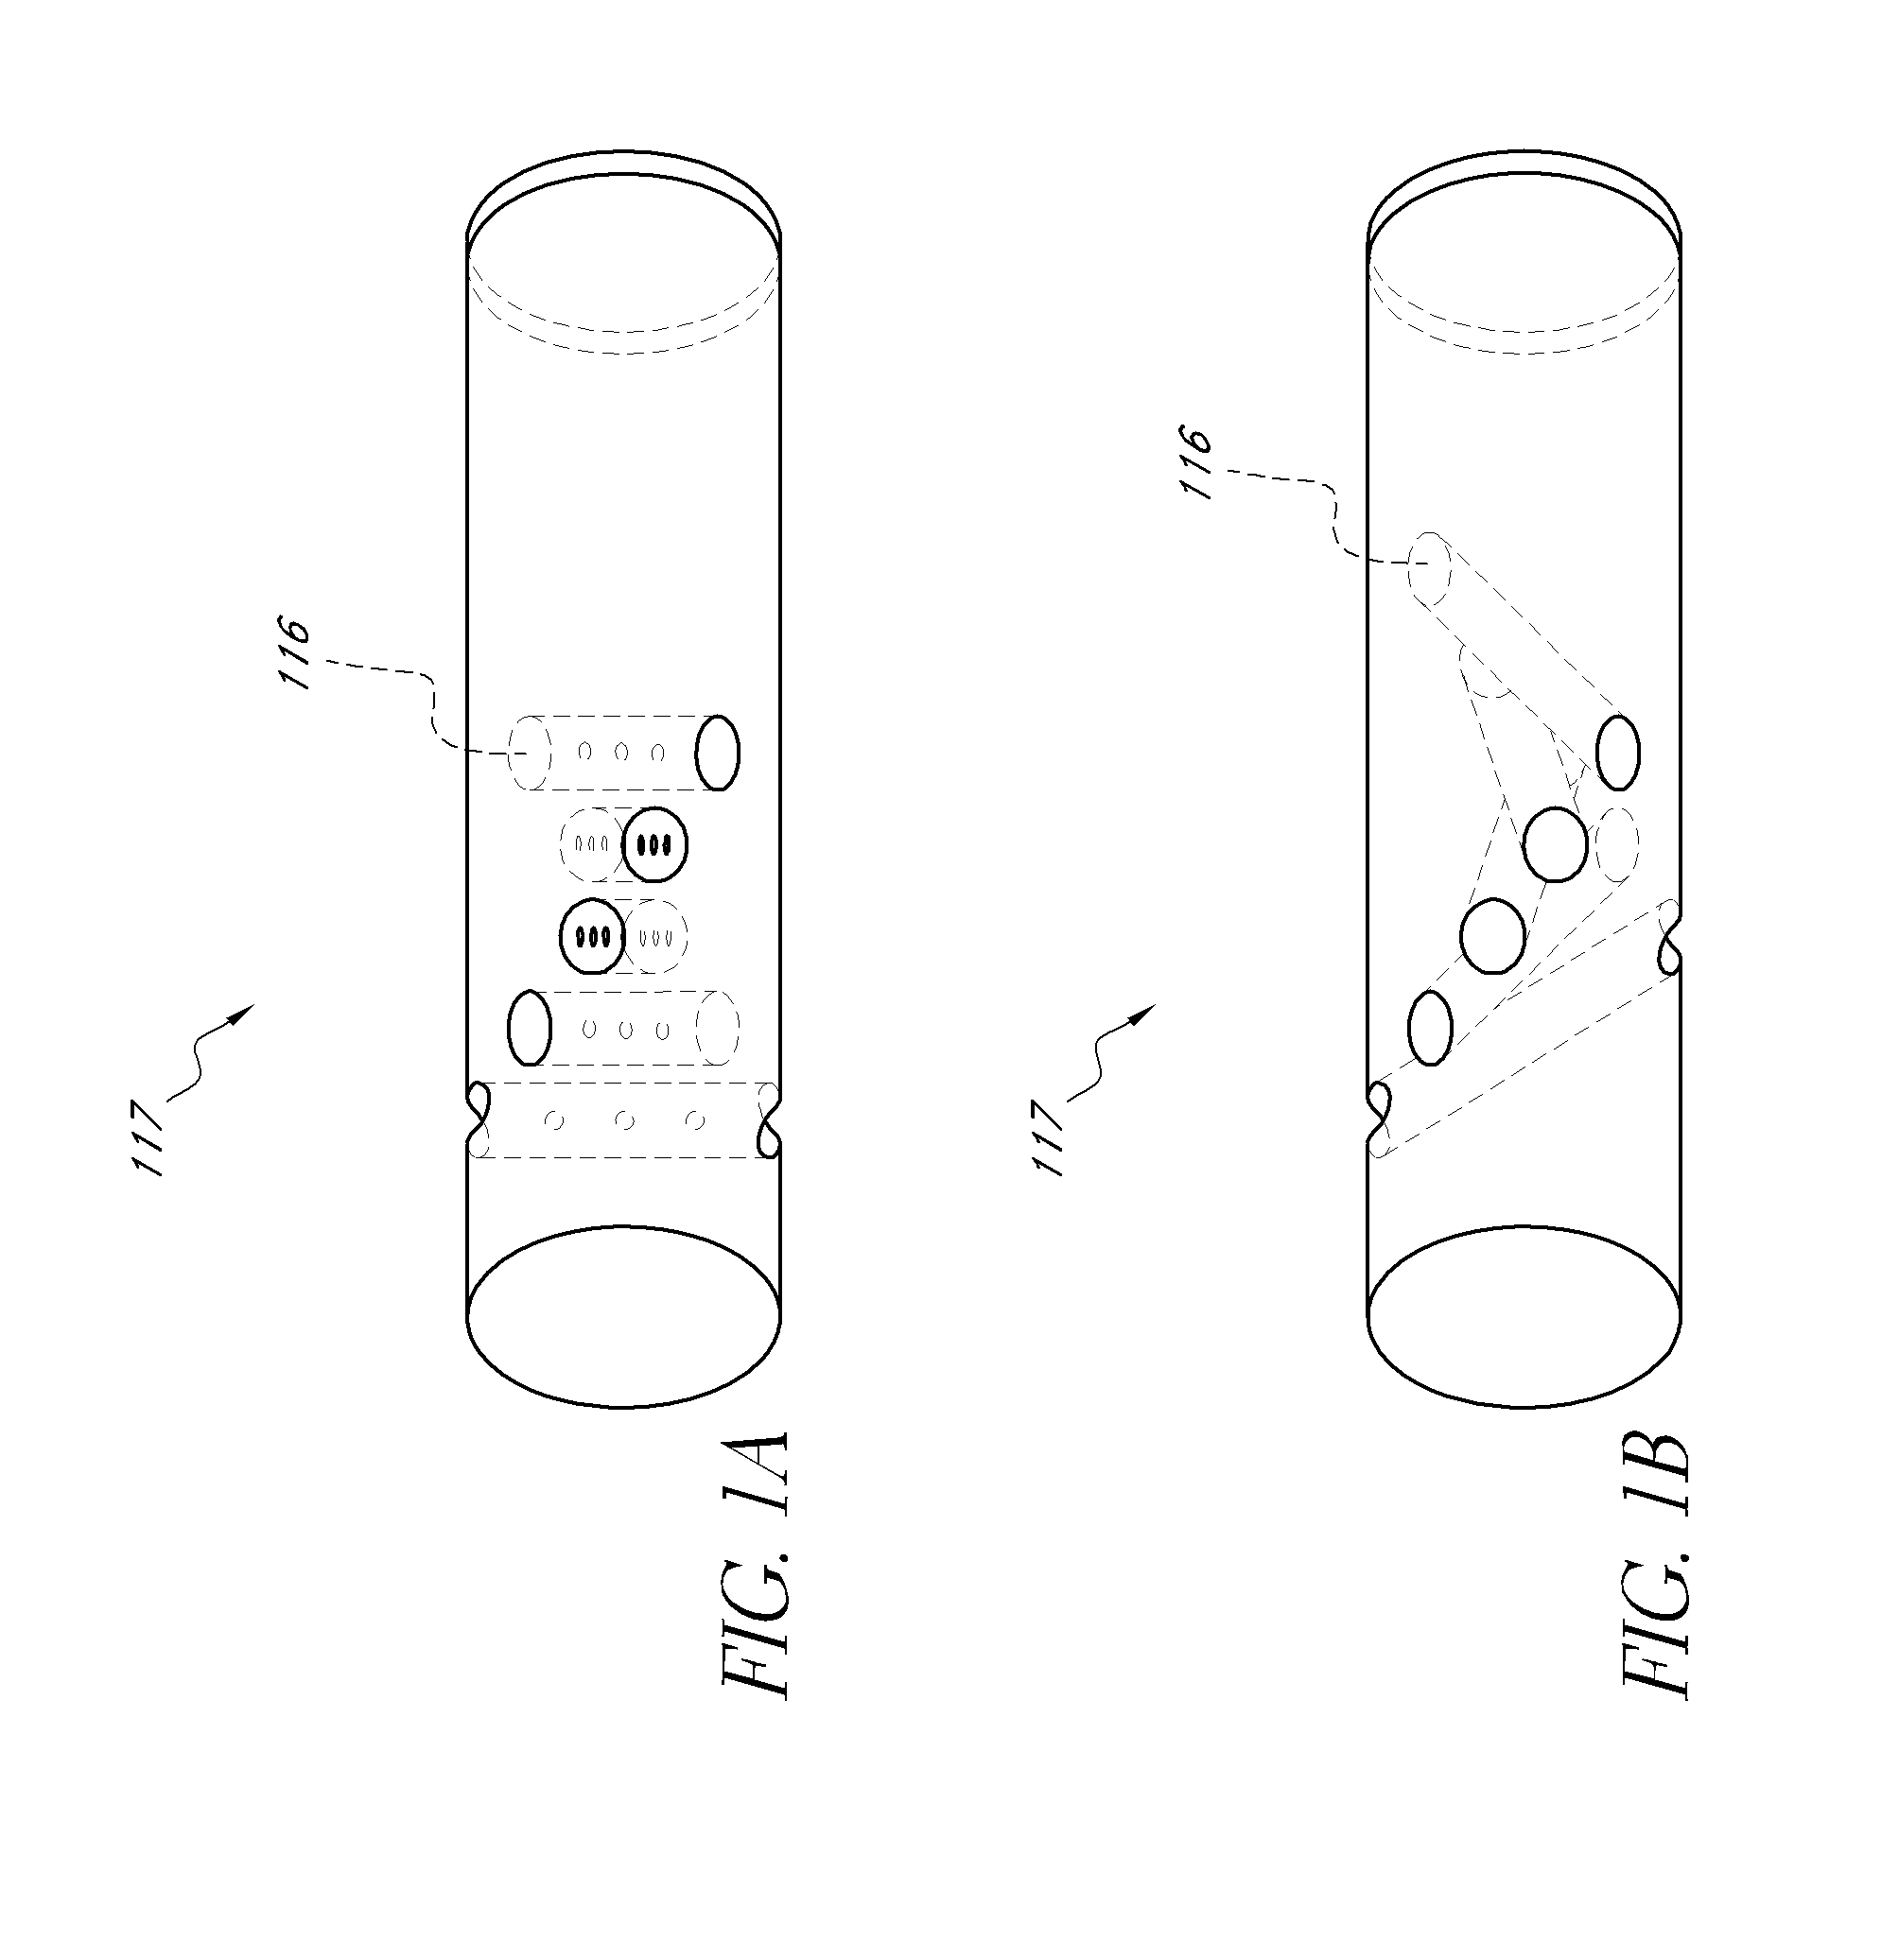 Optical sensor configuration and methods for monitoring glucose activity in interstitial fluid